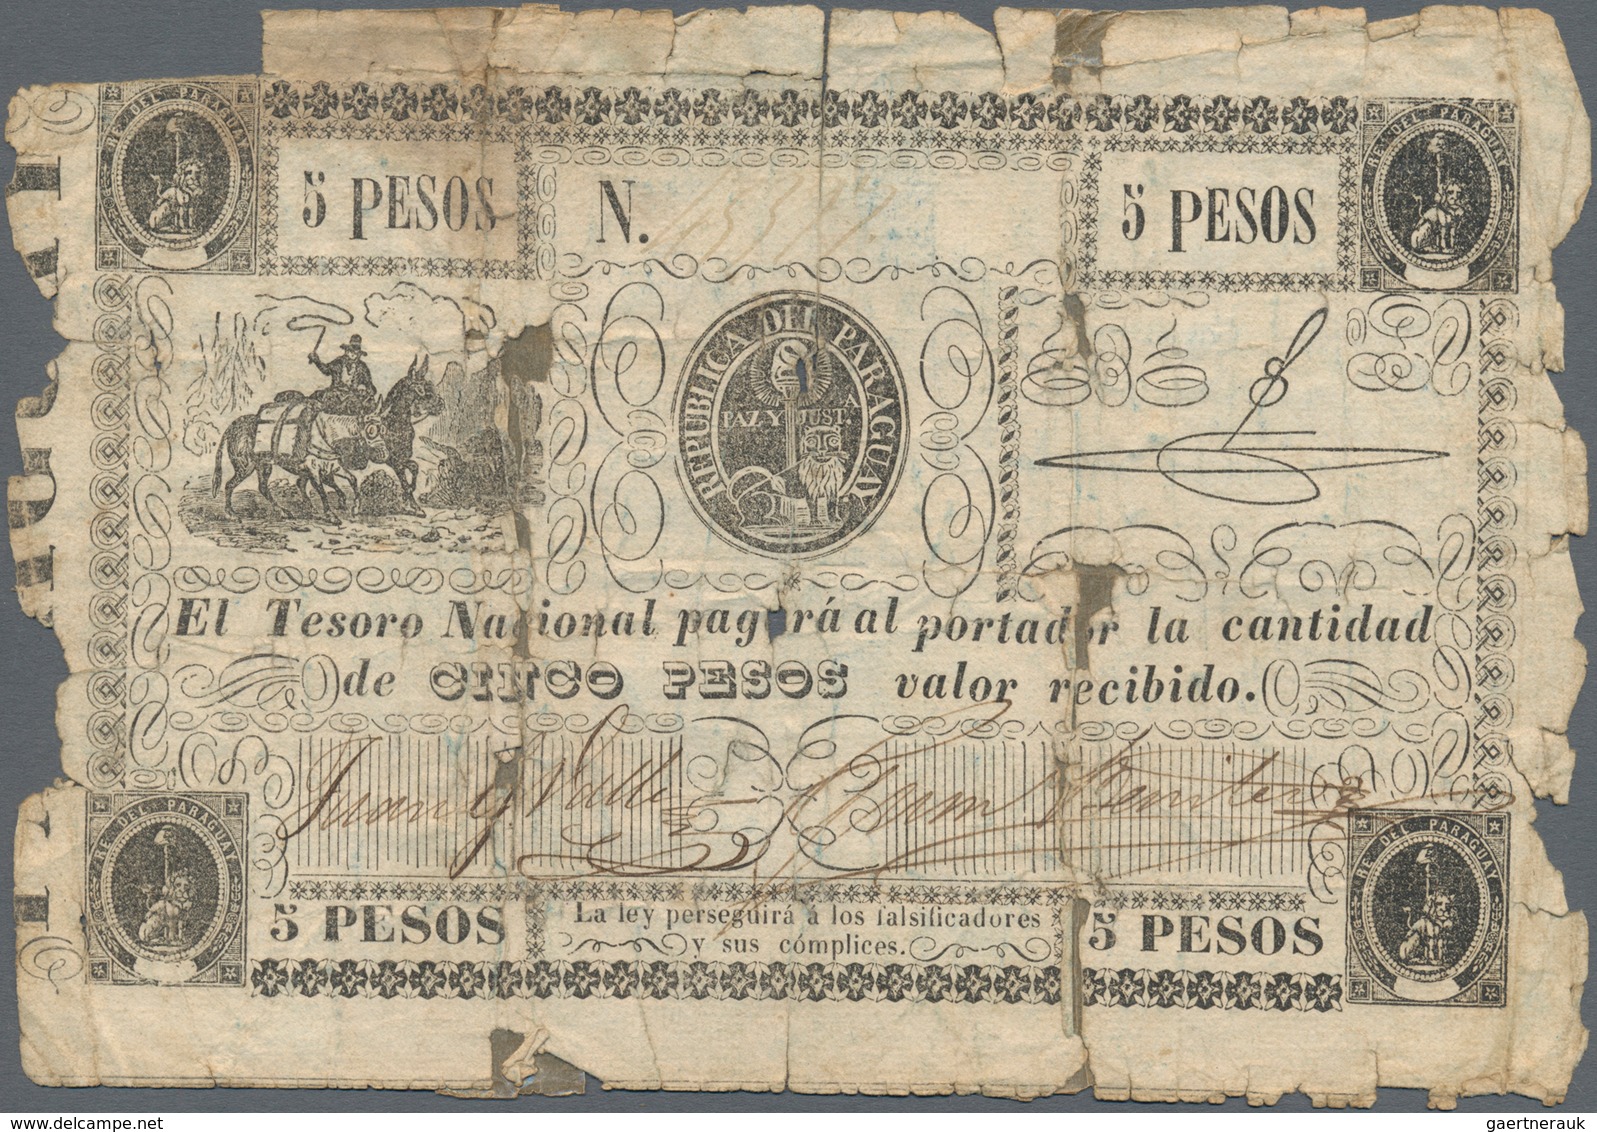 Paraguay: Very nice set with 7 banknotes of the "Tesoro Nacional" and "Banco de la Republica" issues